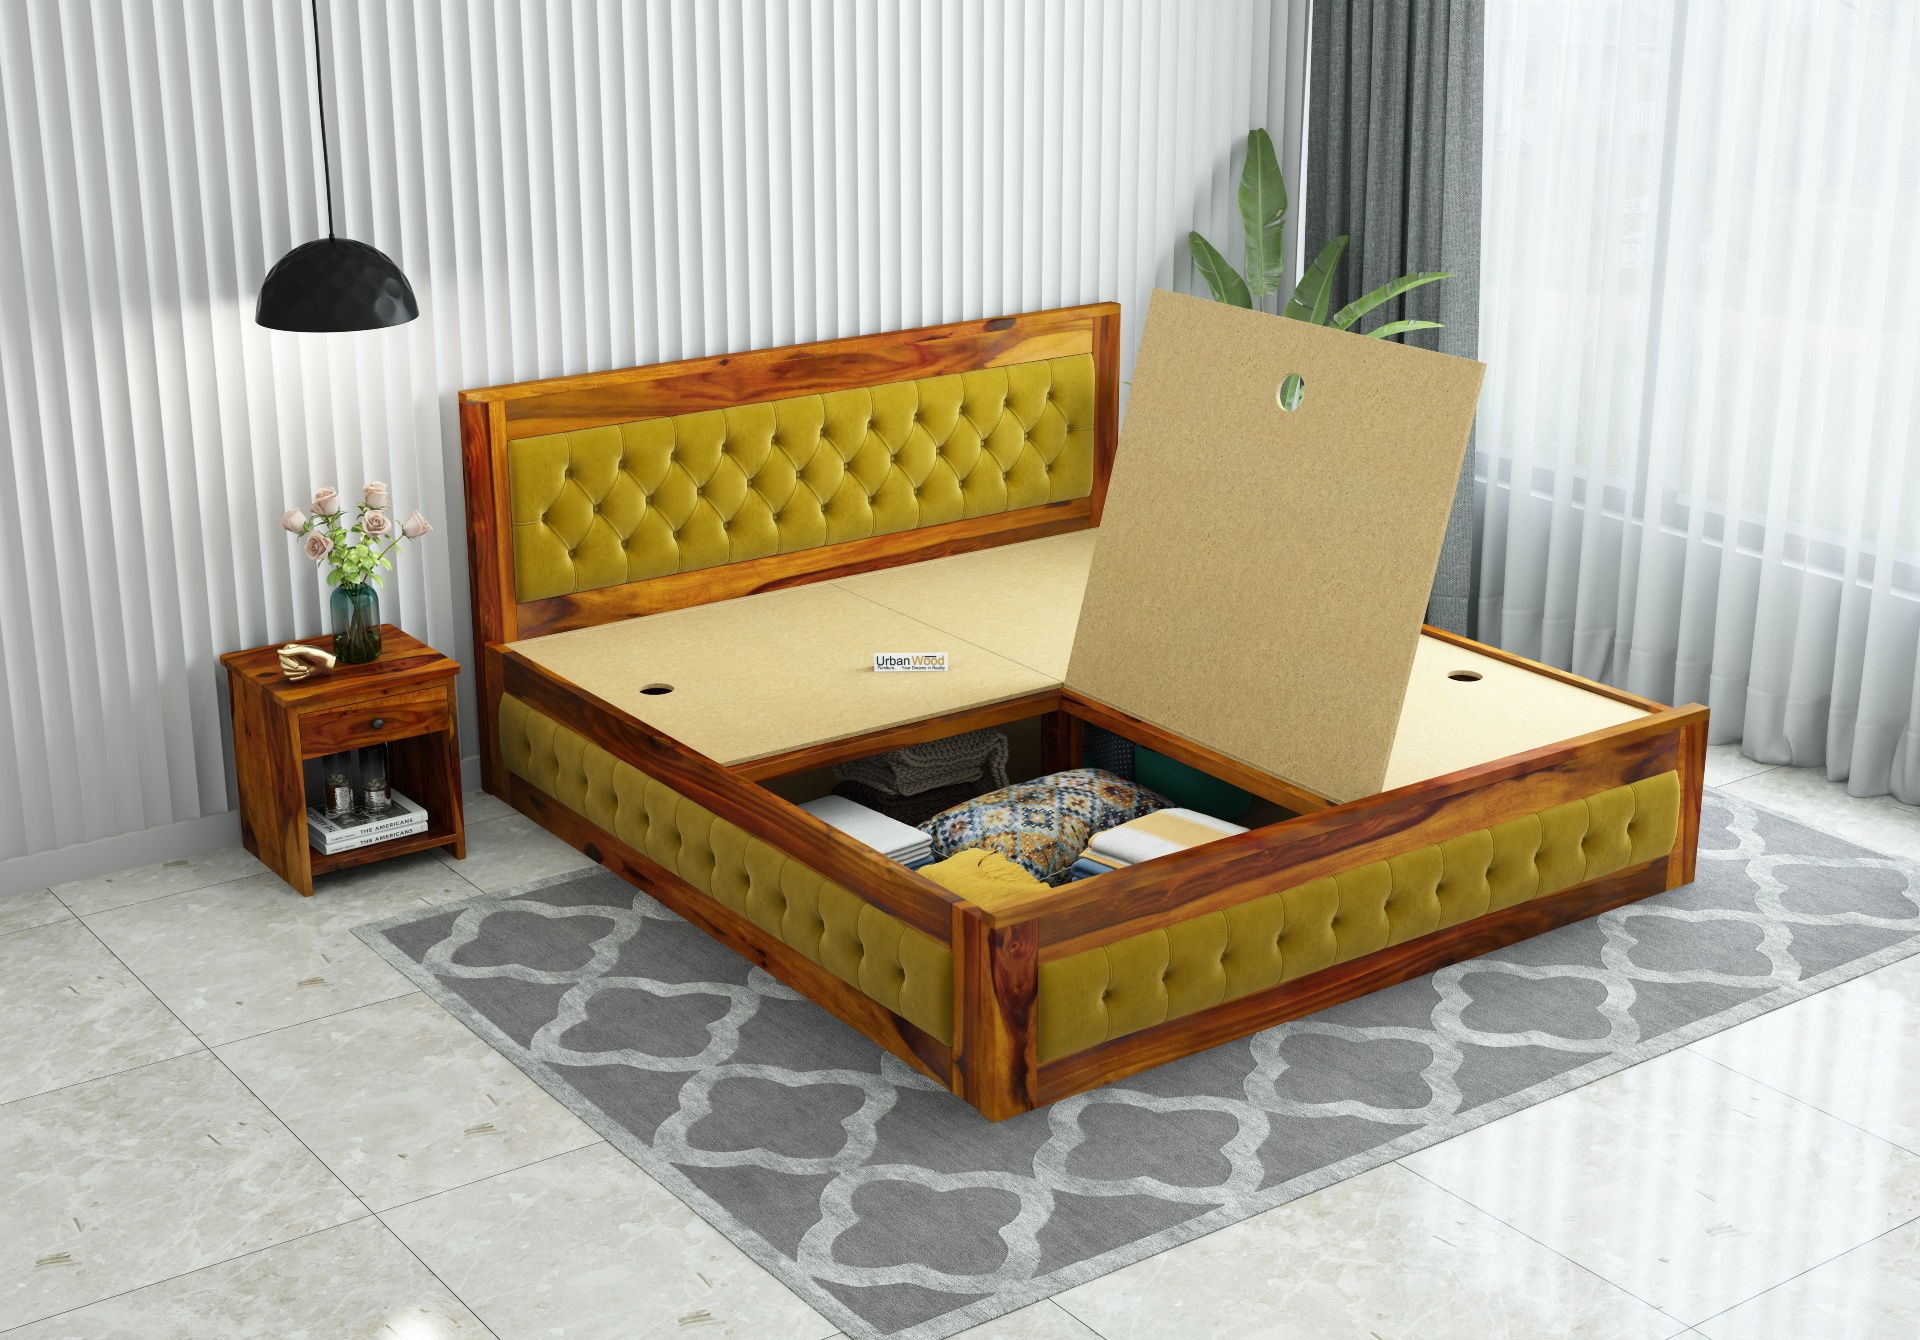 Jolly Wooden Bed with Box Storage ( King Size, Honey Finish )